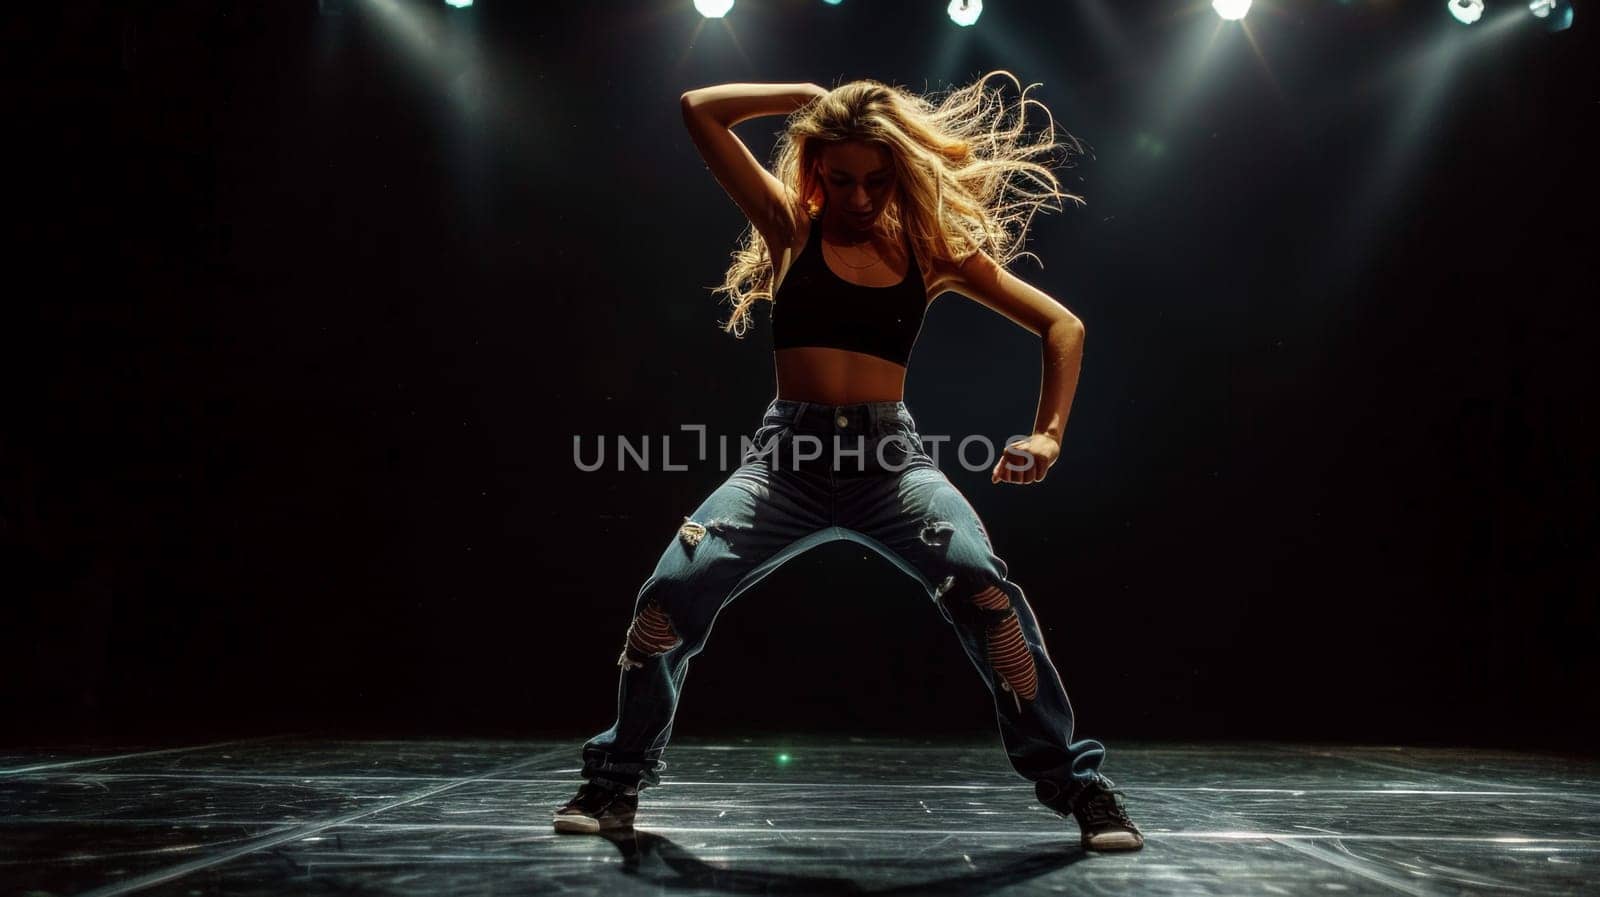 A woman dancing on stage in front of a spotlight